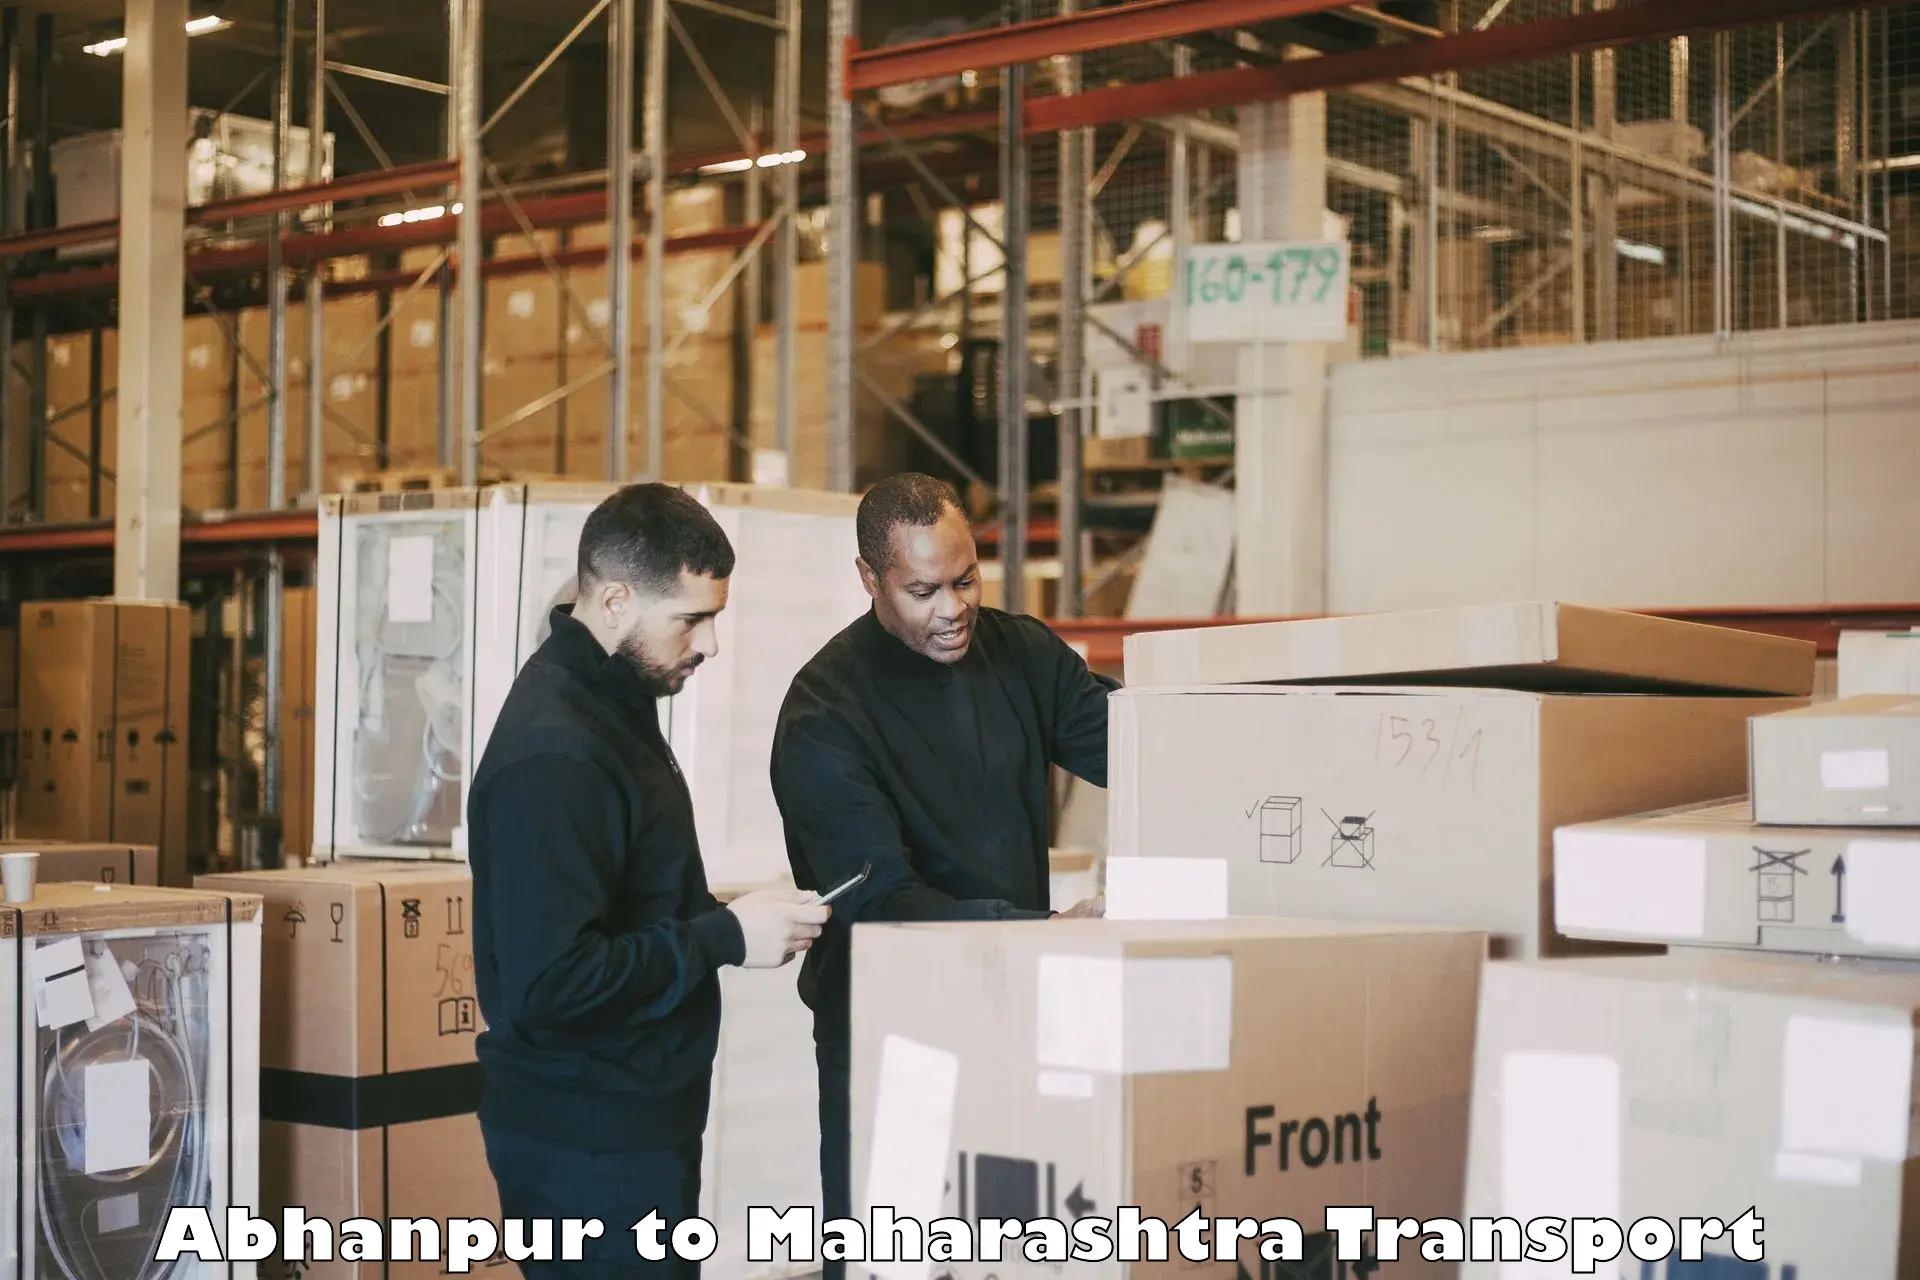 Truck transport companies in India Abhanpur to Nashik